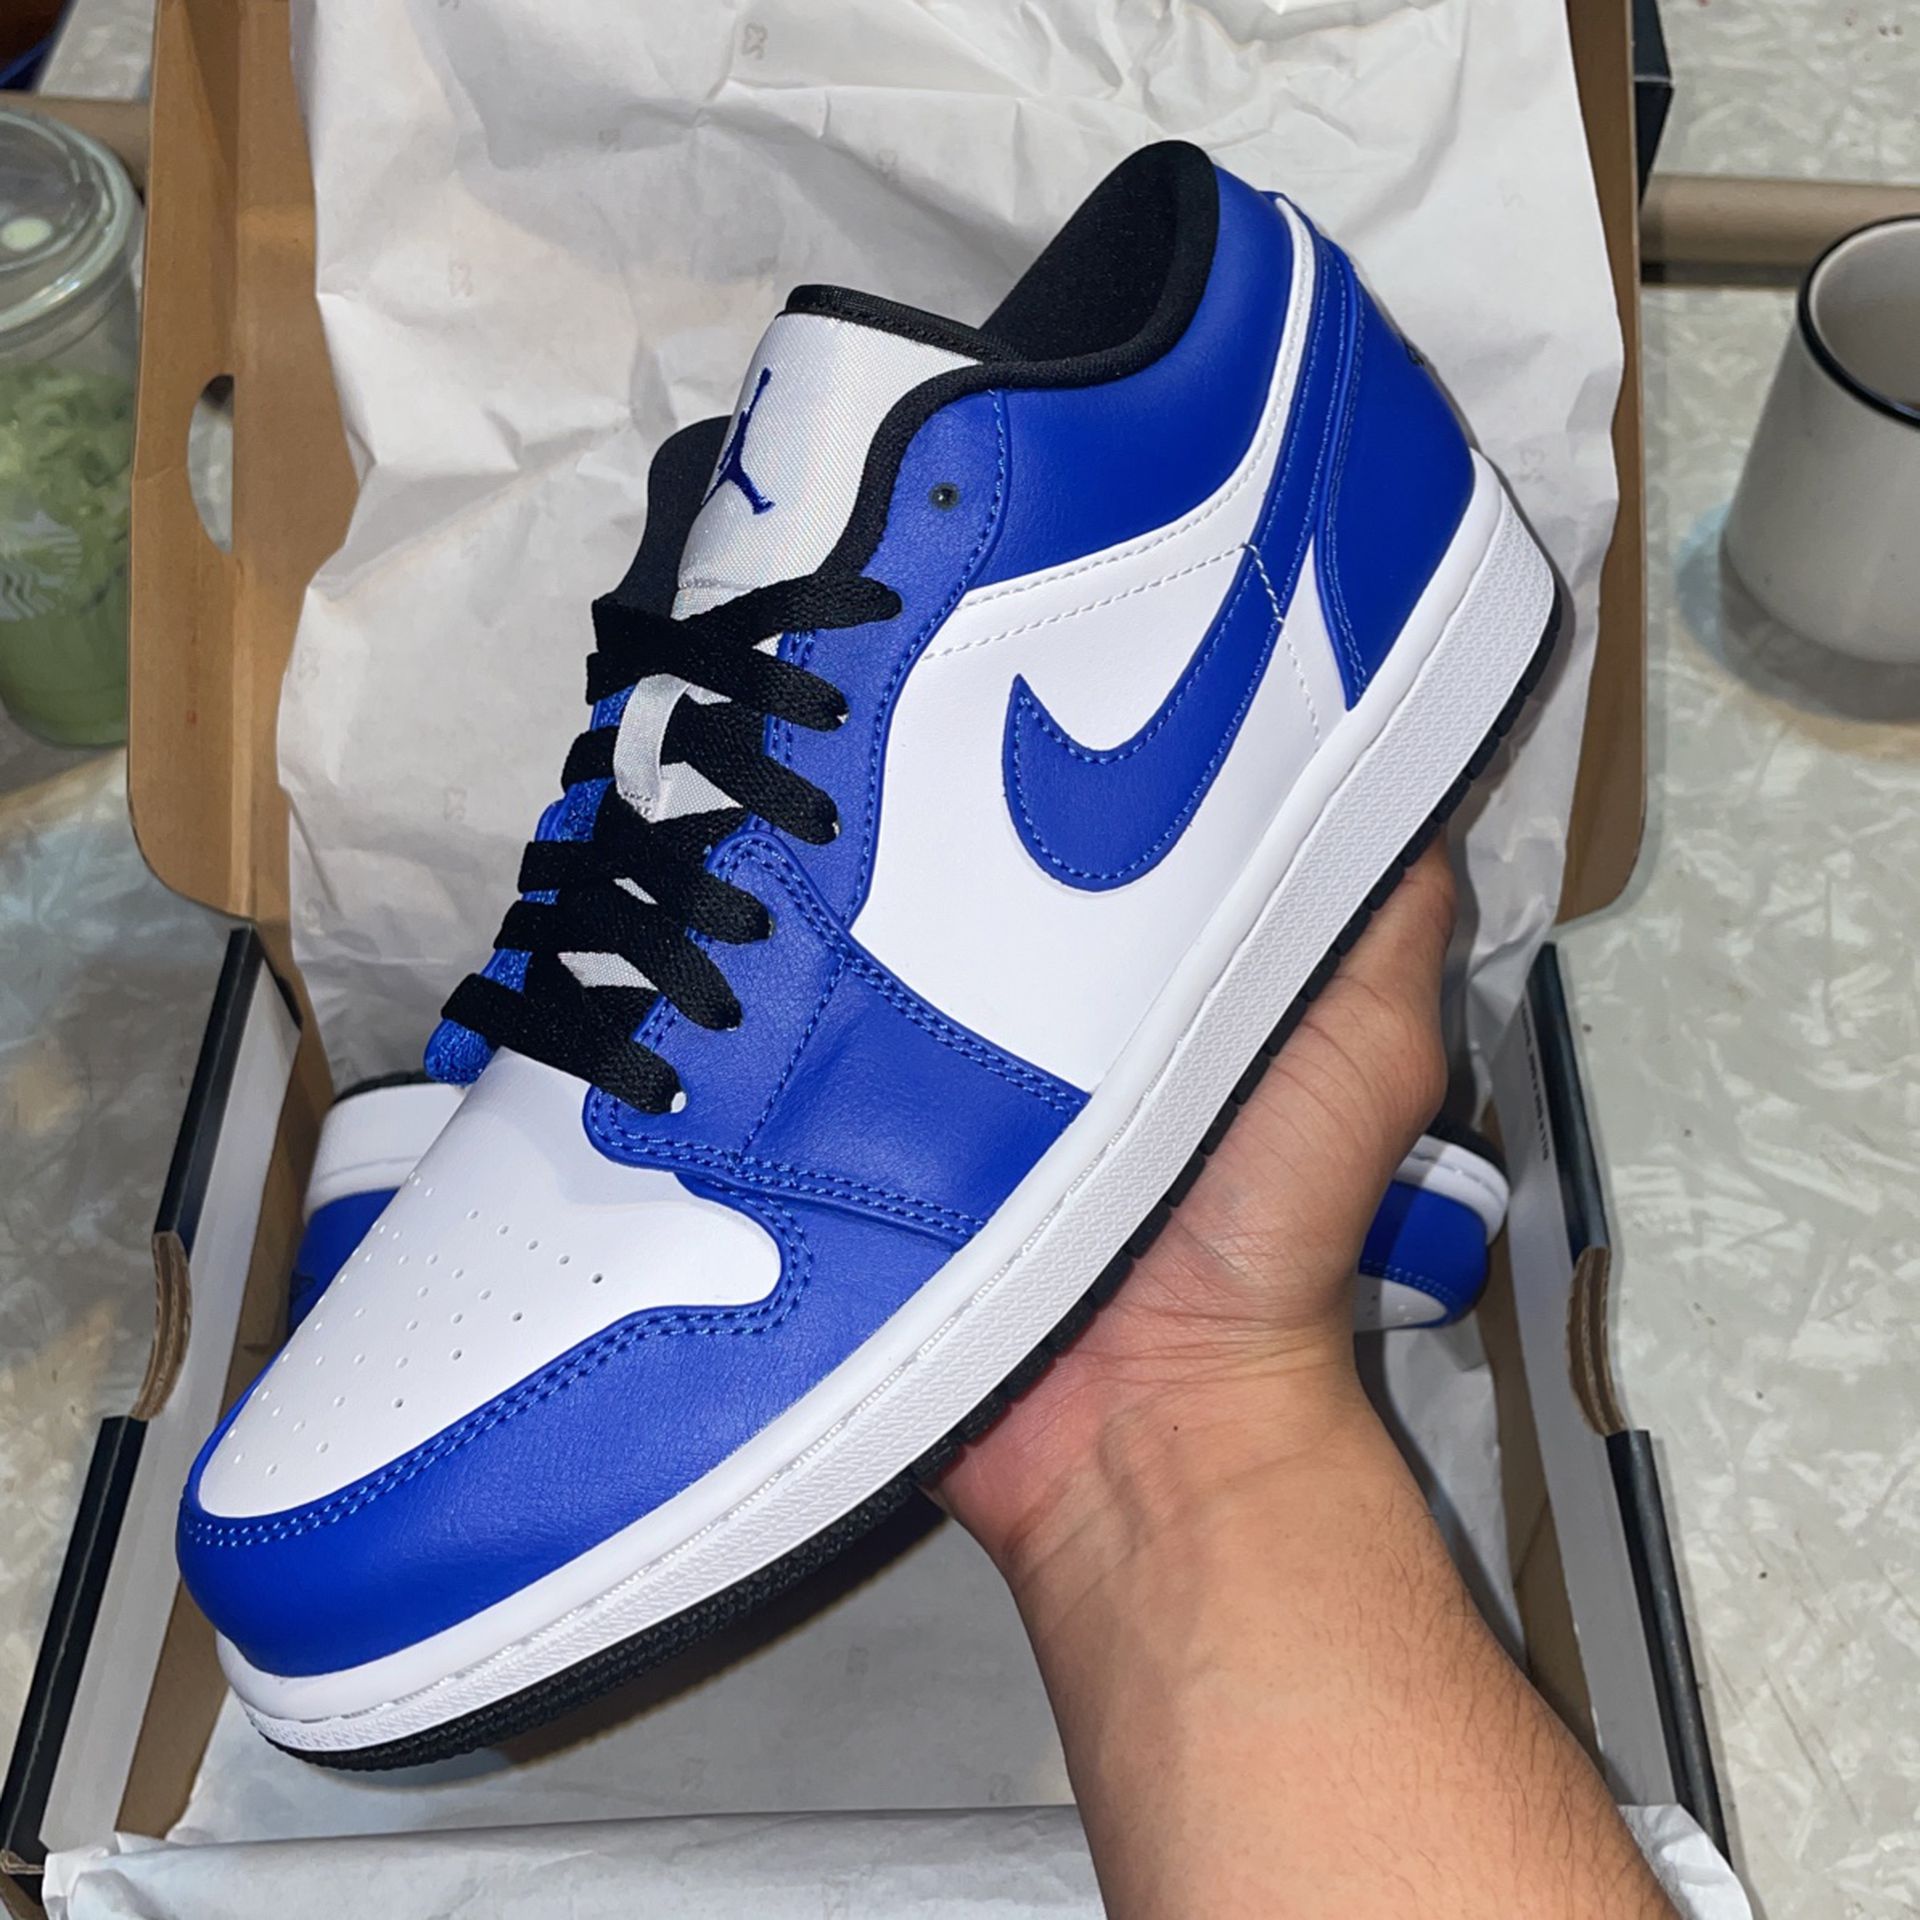 Jordan 1 Low Game Royal for Sale in Chicago, IL - OfferUp